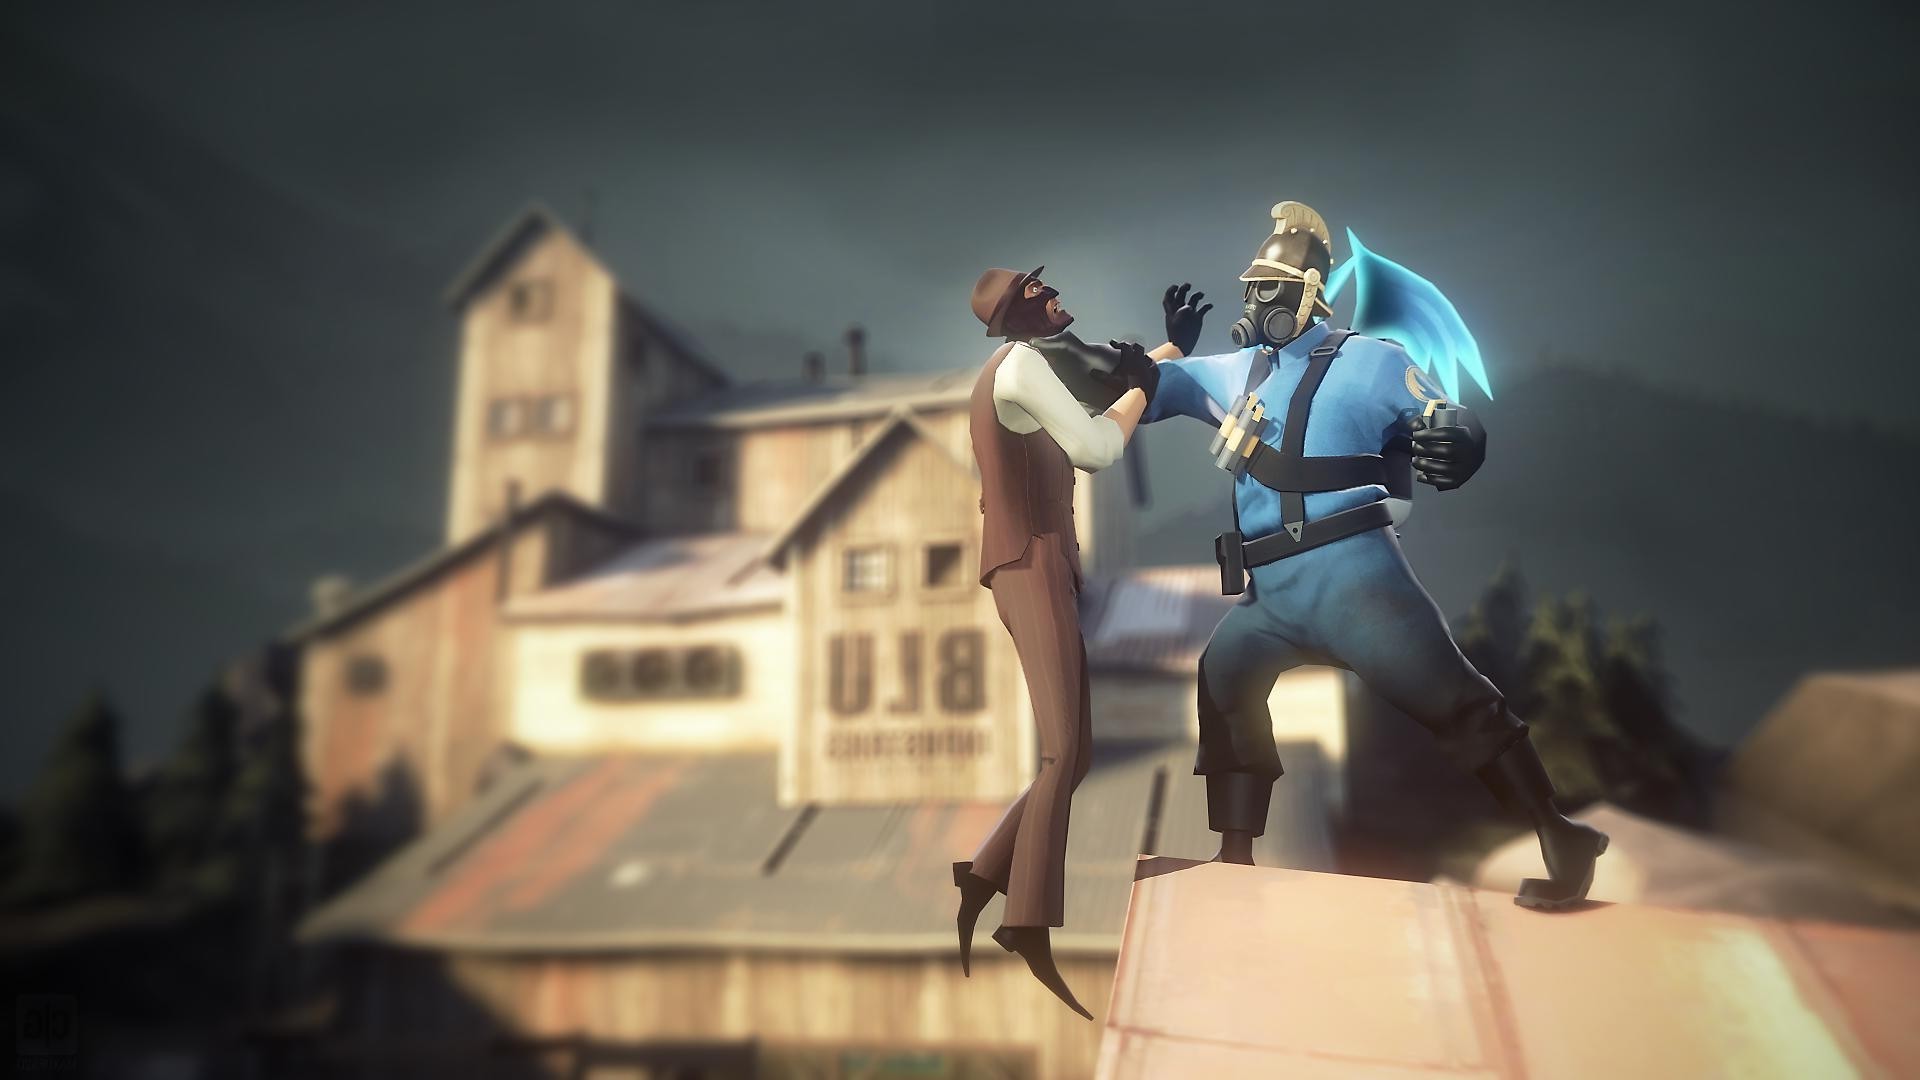 Pyro (character), Team Fortress 2 Wallpaper